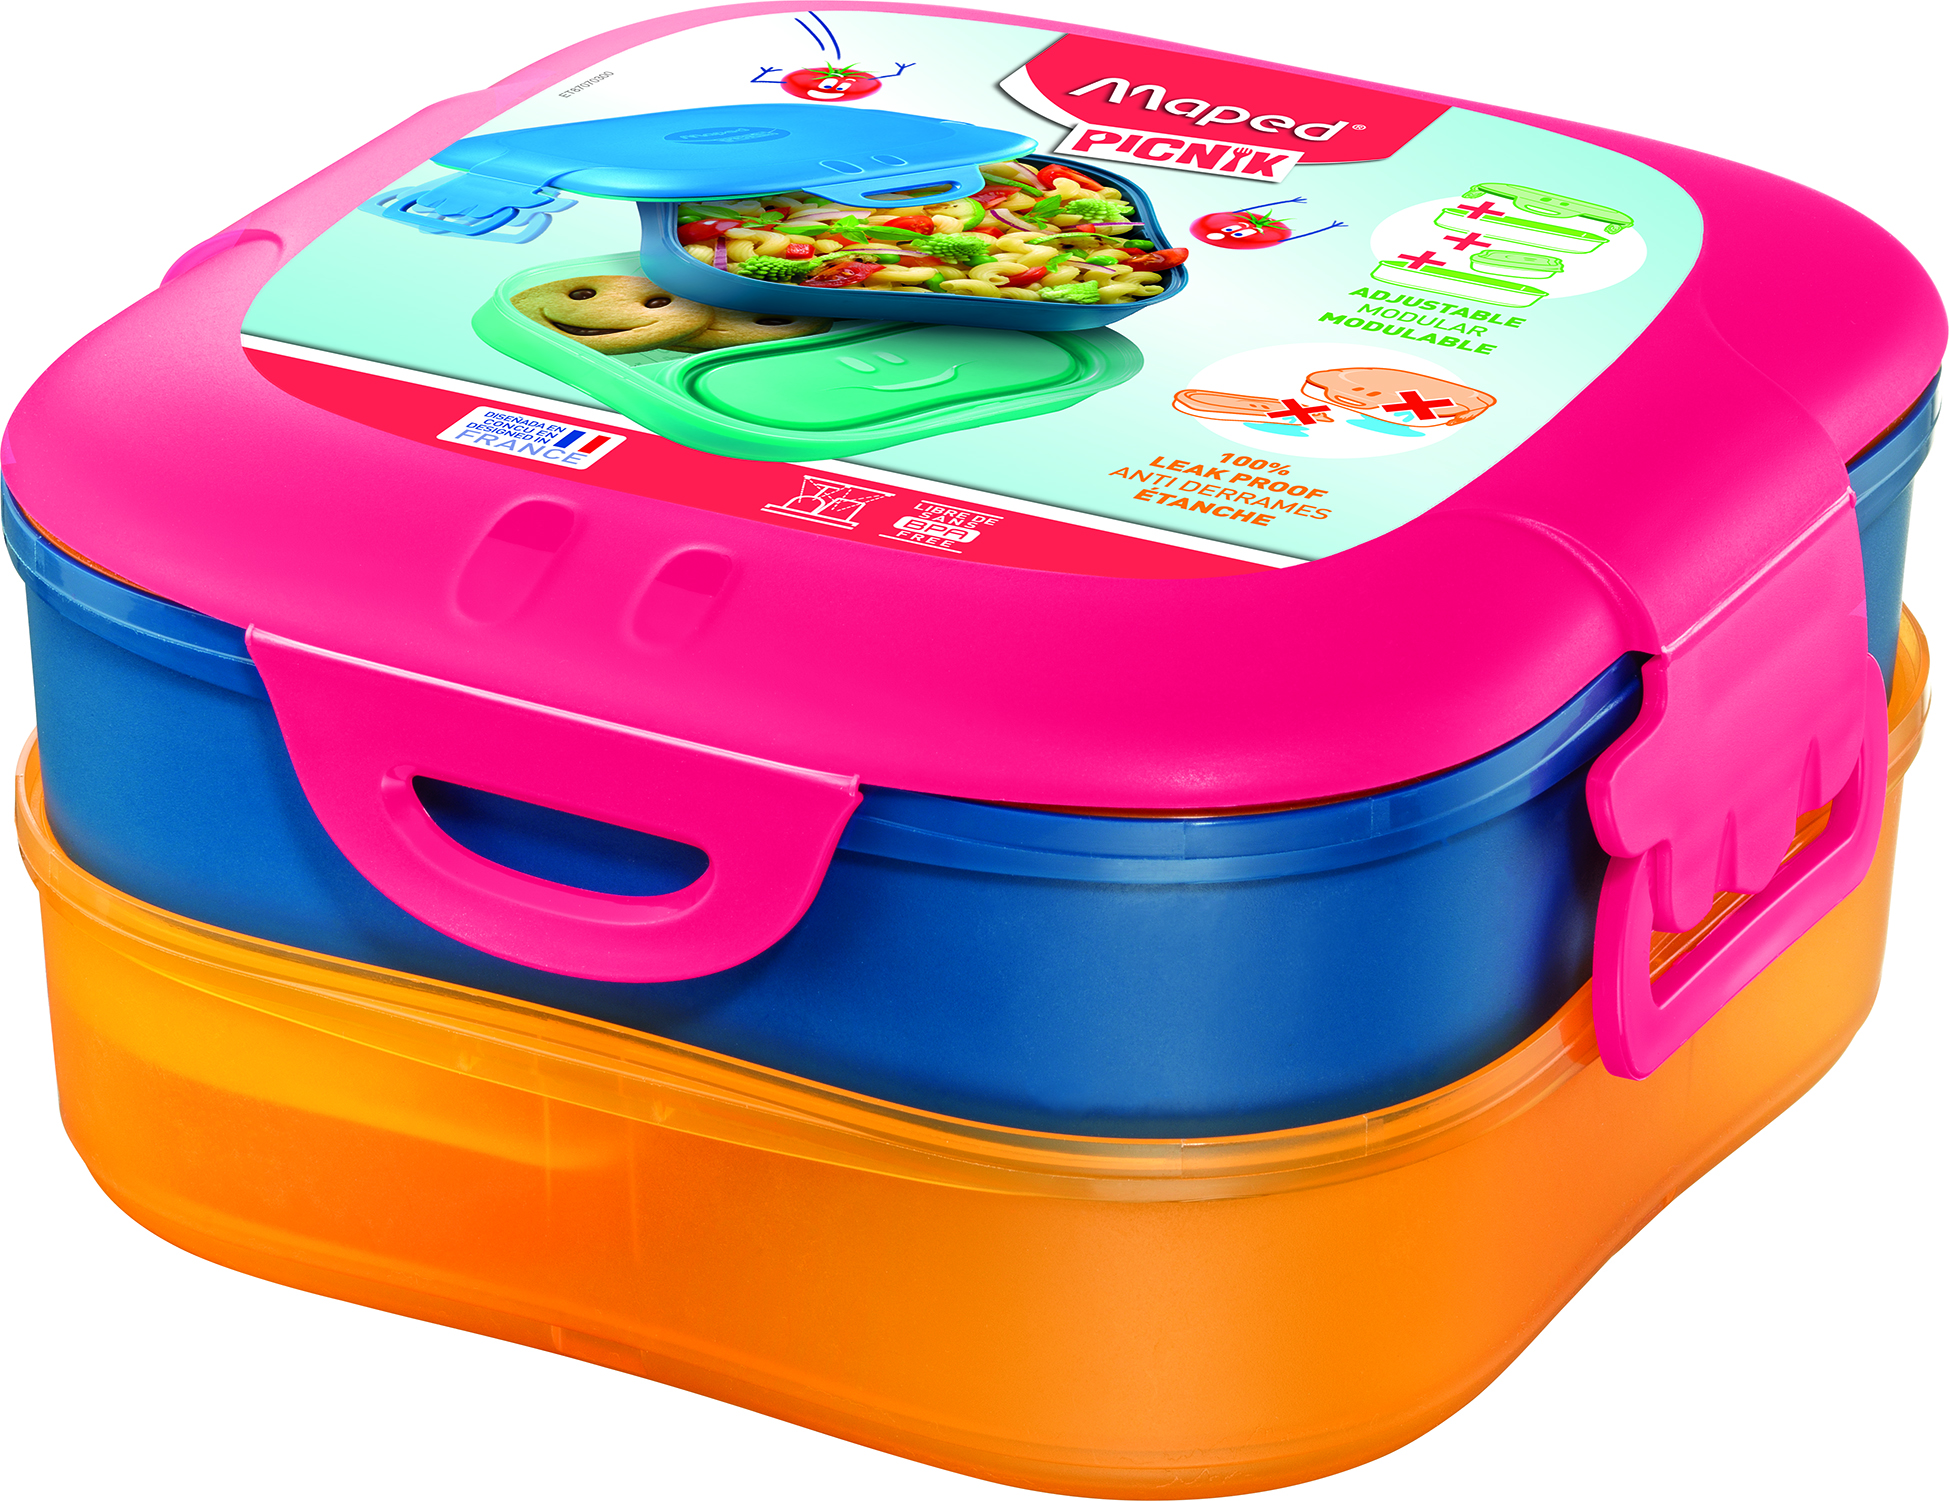 MAPED CONCEPT KIDS FIGURATIVE LUNCH BOX 3-IN-1 PINK REF 870701